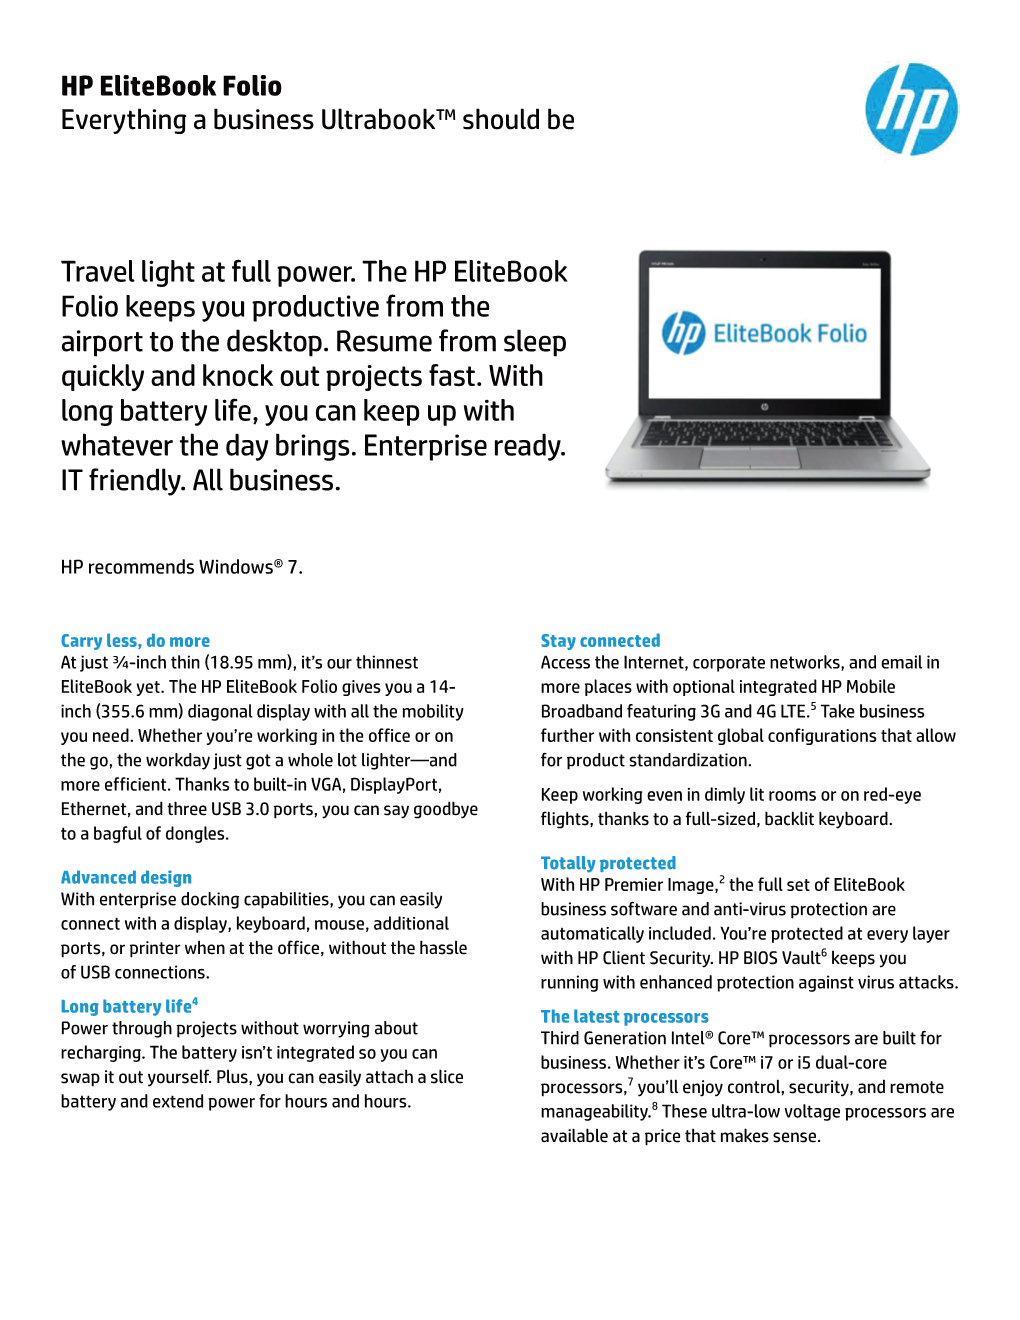 HP Elitebook Folio Everything a Business Ultrabook™ Should Be